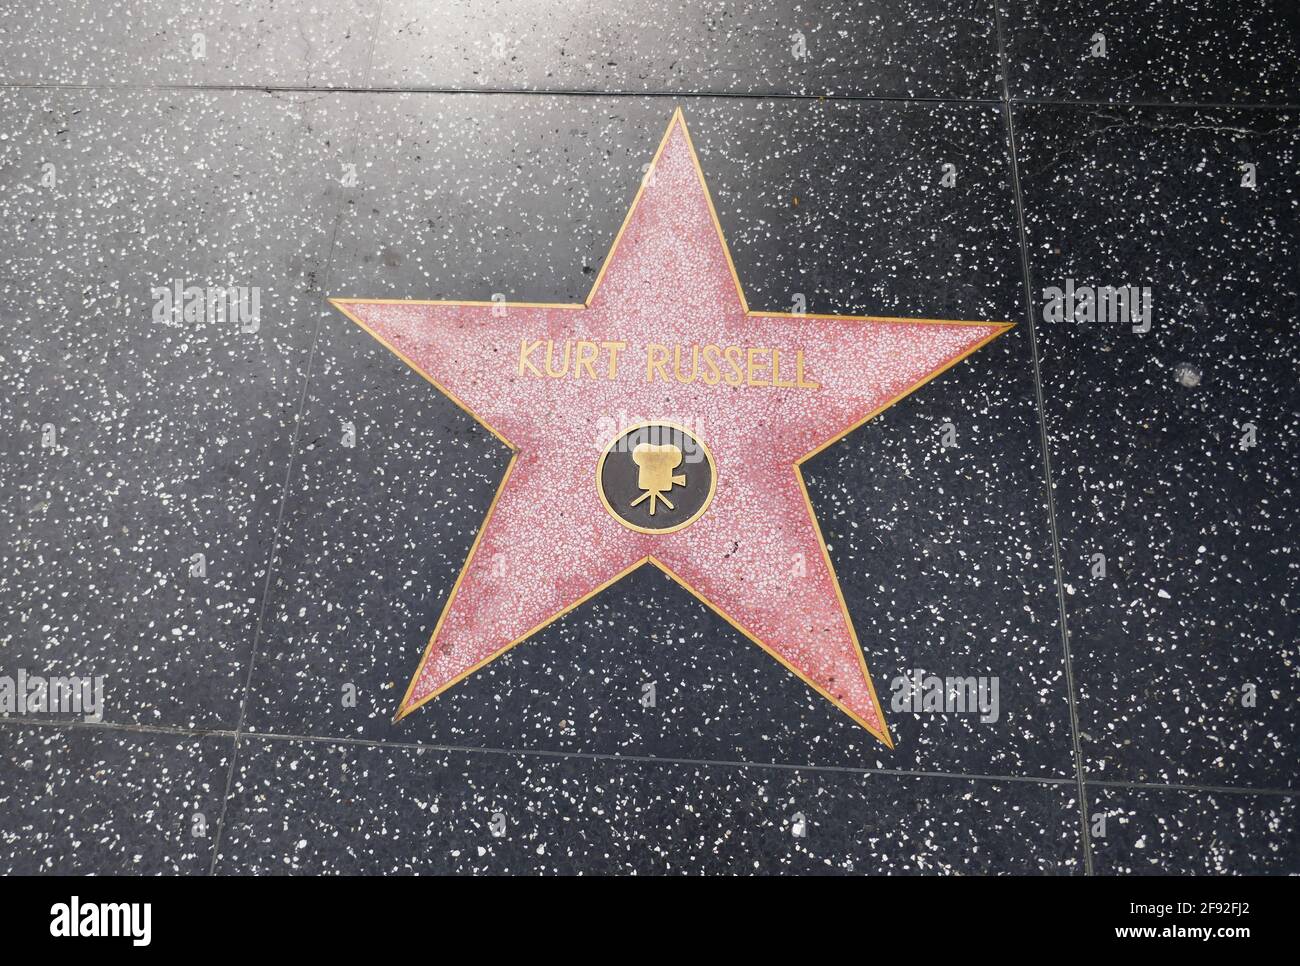 Hollywood, California, USA 14th April 2021 A general view of atmosphere of actor Kurt Russell's Star on the Hollywood Walk of Fame on April 14, 2021 in Hollywood, California, USA. Photo by Barry King/Alamy Stock Photo Stock Photo